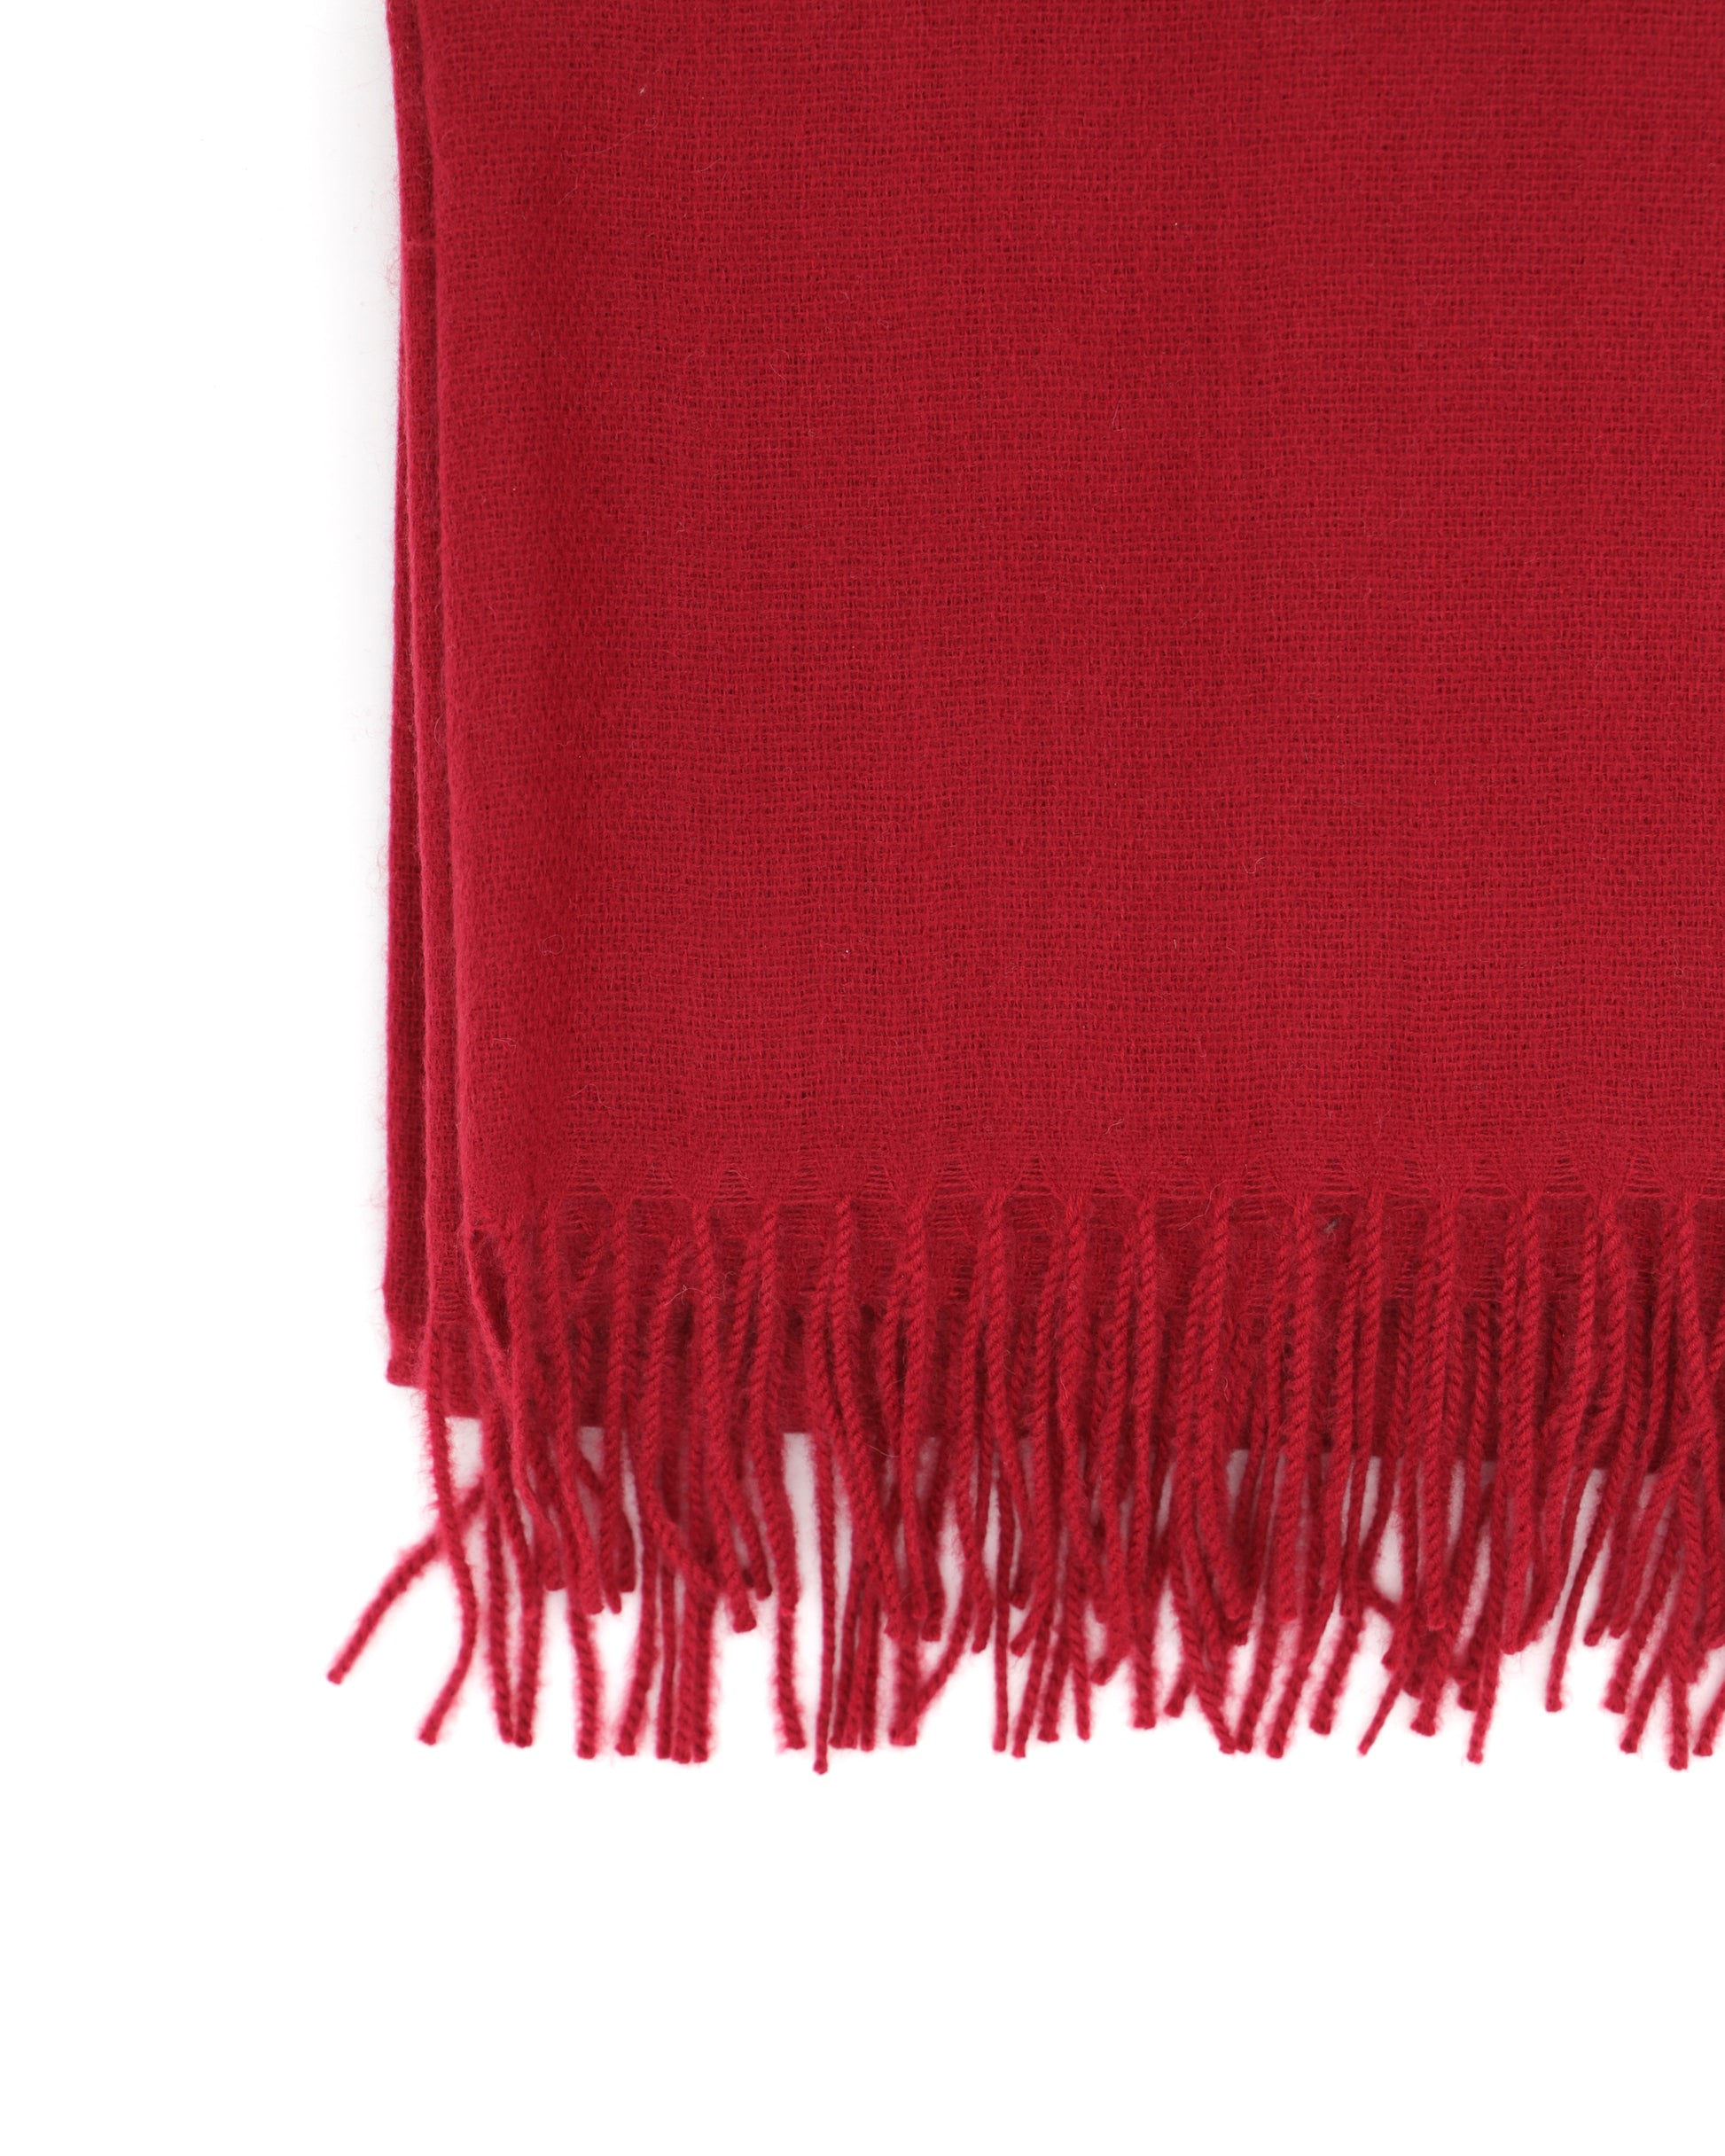 This Scarf is a finest XL-Size soft scarf from Villanelle. A luxurious accessory for women made from the softest wool and cashmere blend for extreme comfort and warmth. It is made in a trendy burgundy red color for a great look and feeling. A cozy accessory for cold winter, autumn and spring days. This product is sourced and manufactured in Poland. This product is sourced and manufactured in Poland.